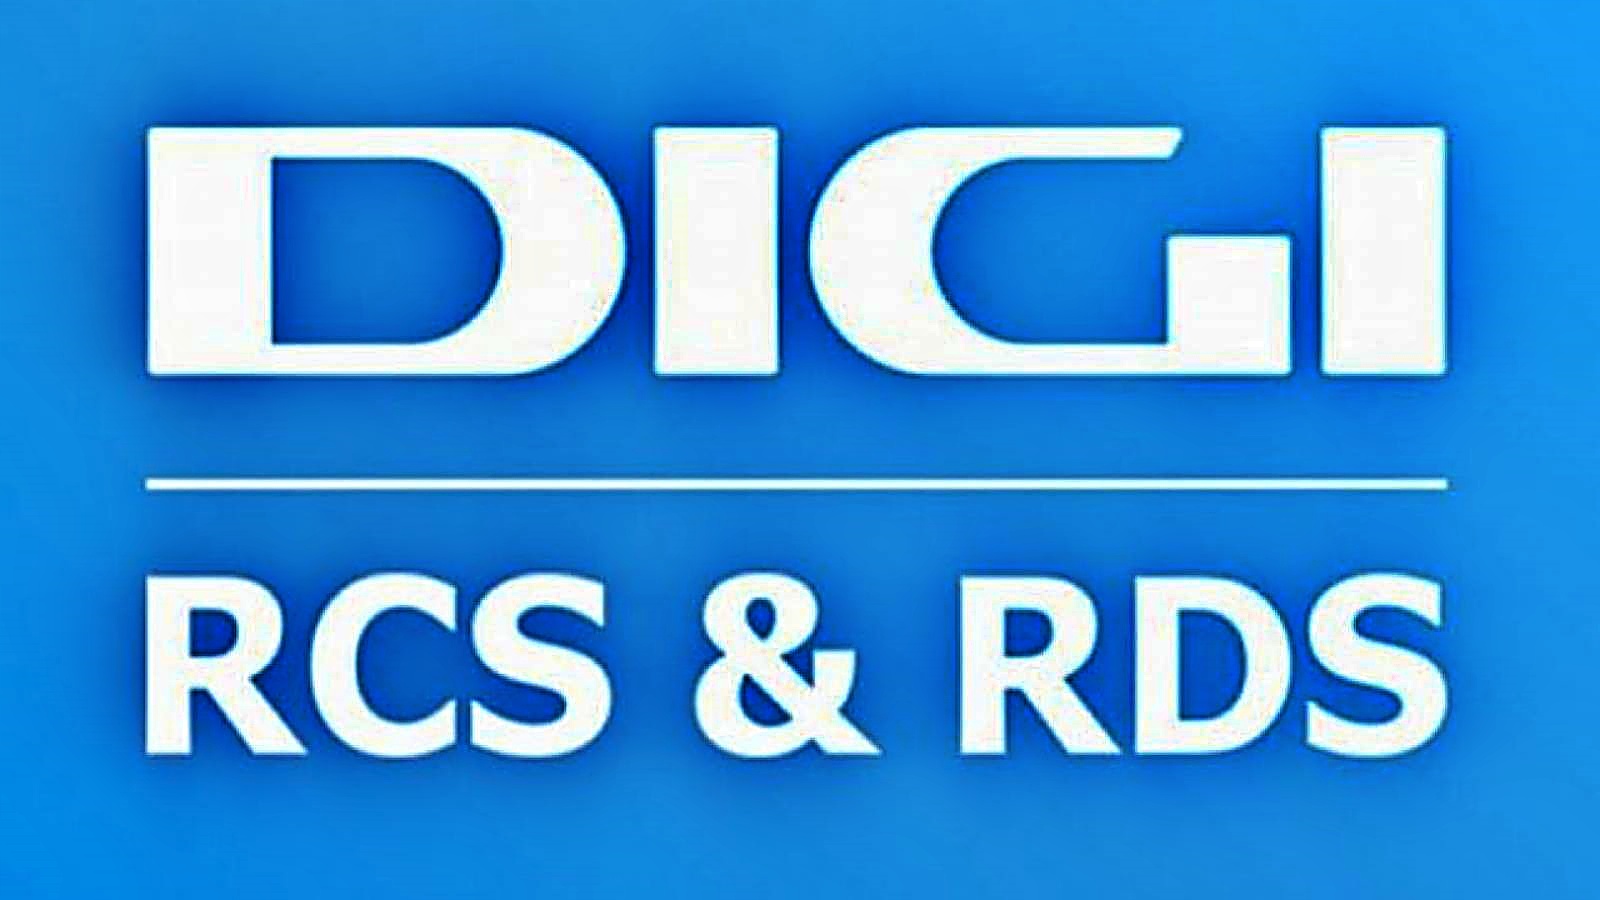 DIGI RCS RDS Announcement ATTENTION Customers FREE Month